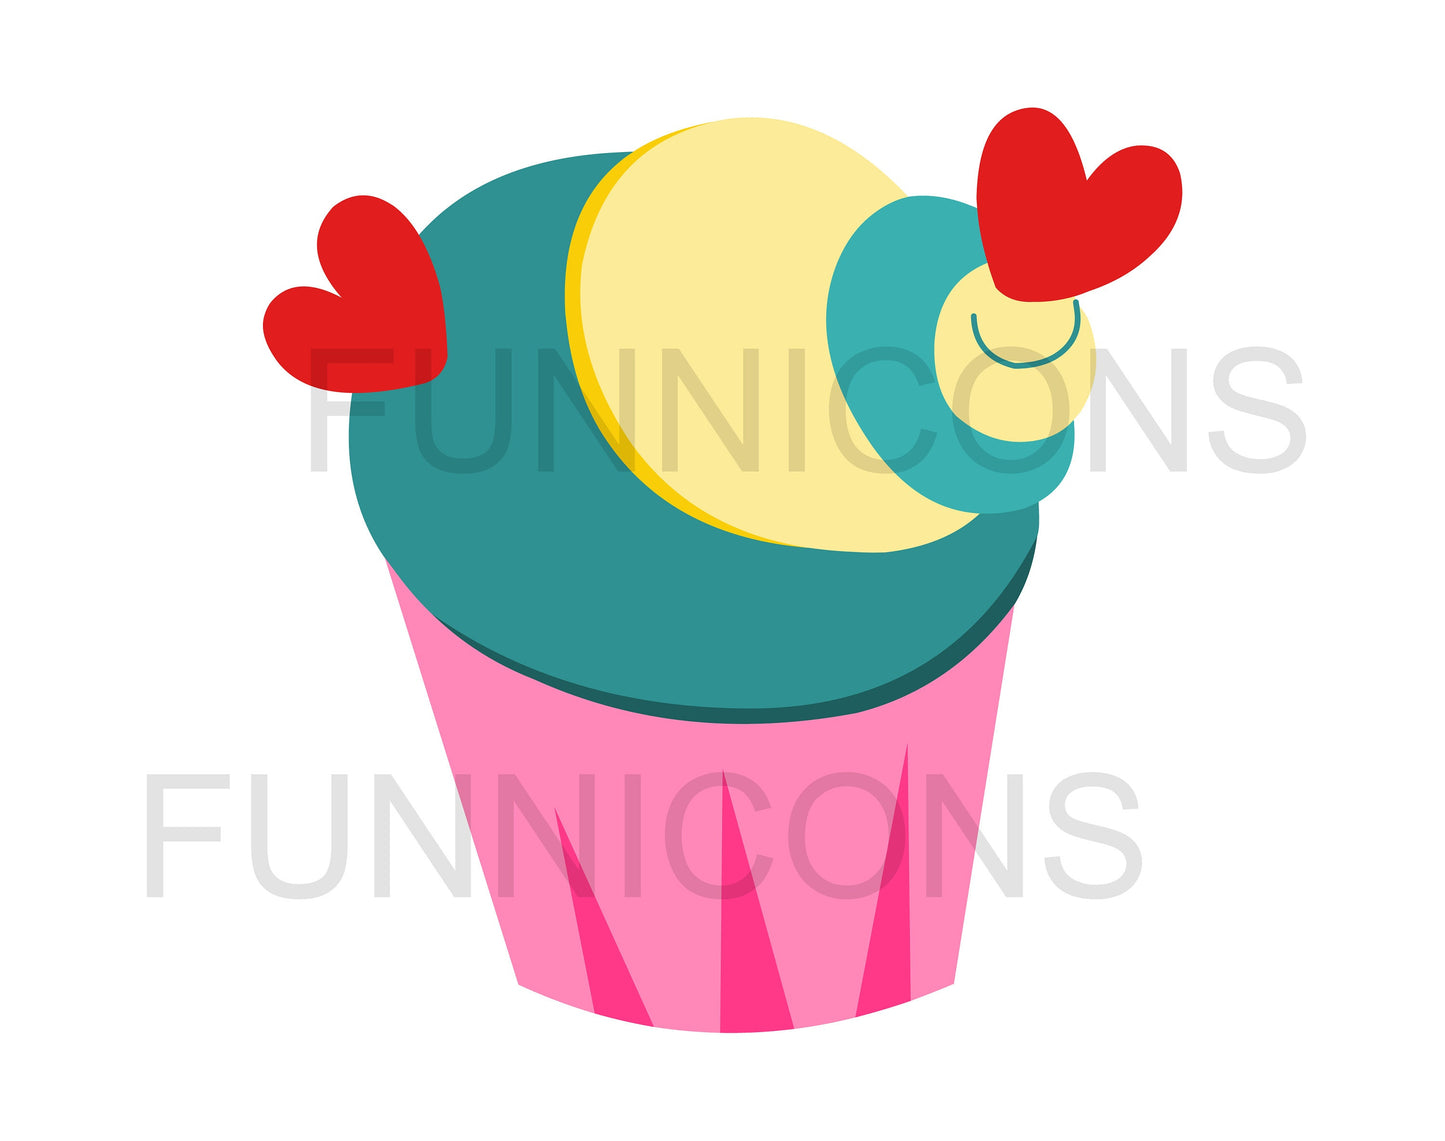 Colorful Cupcakes Set